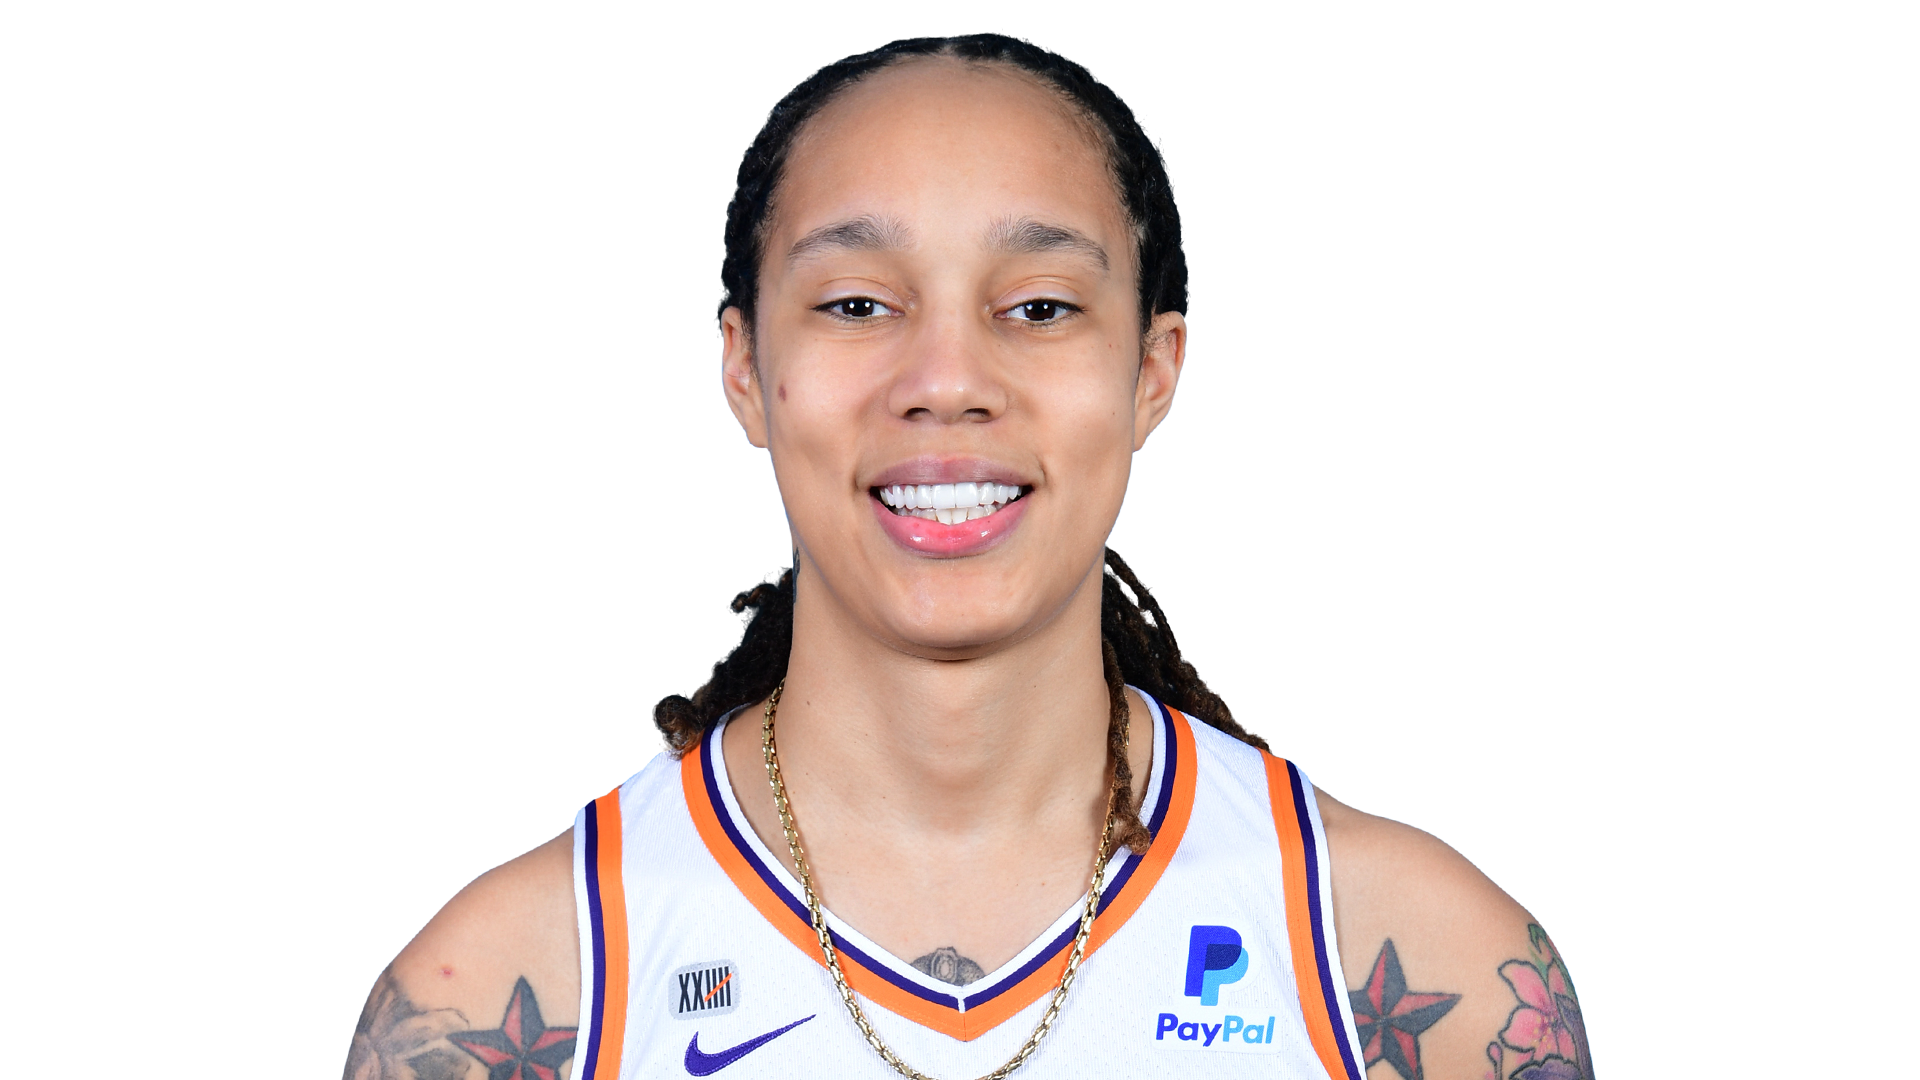 U.S. House passes Rep. Greg Stanton’s bipartisan resolution calling for the immediate release of Brittney Griner